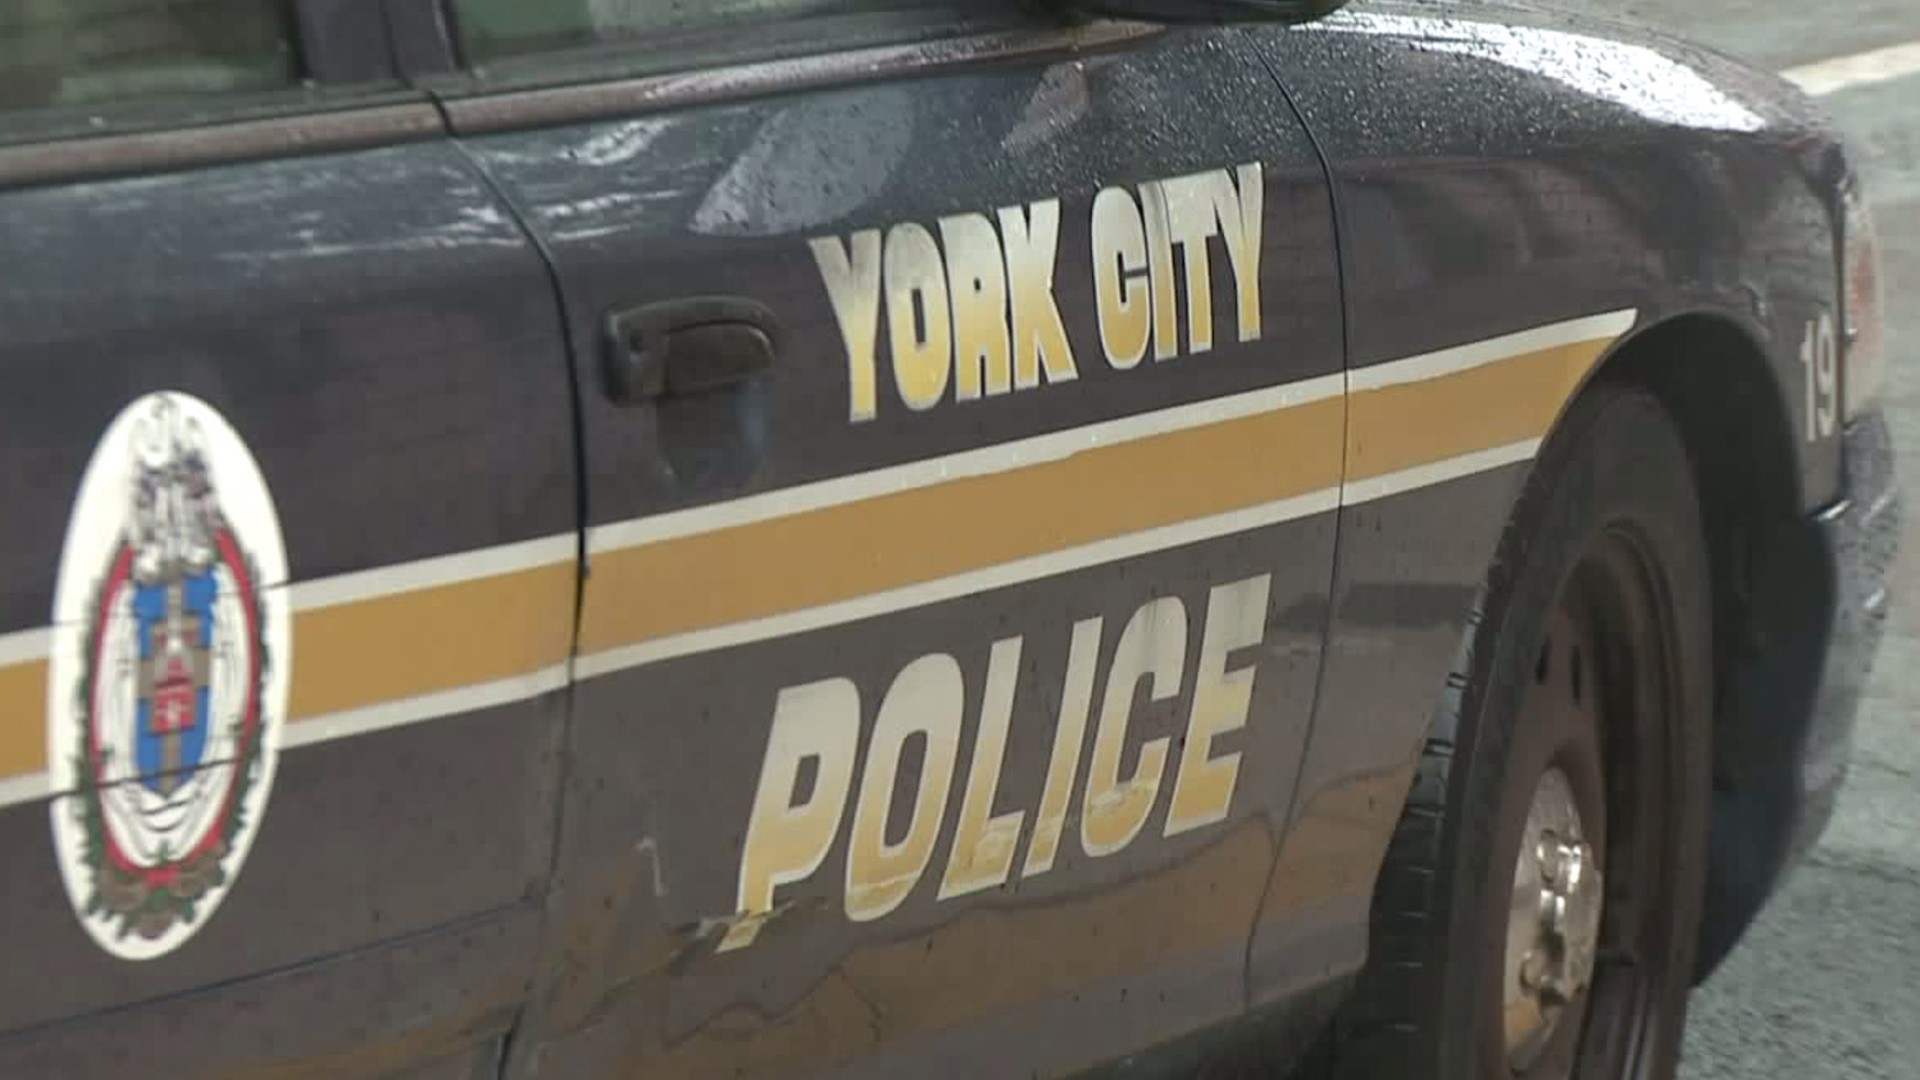 To recruit more officers, York City Police Department is awarding bonus points on the civil service test to candidates with diverse backgrounds.